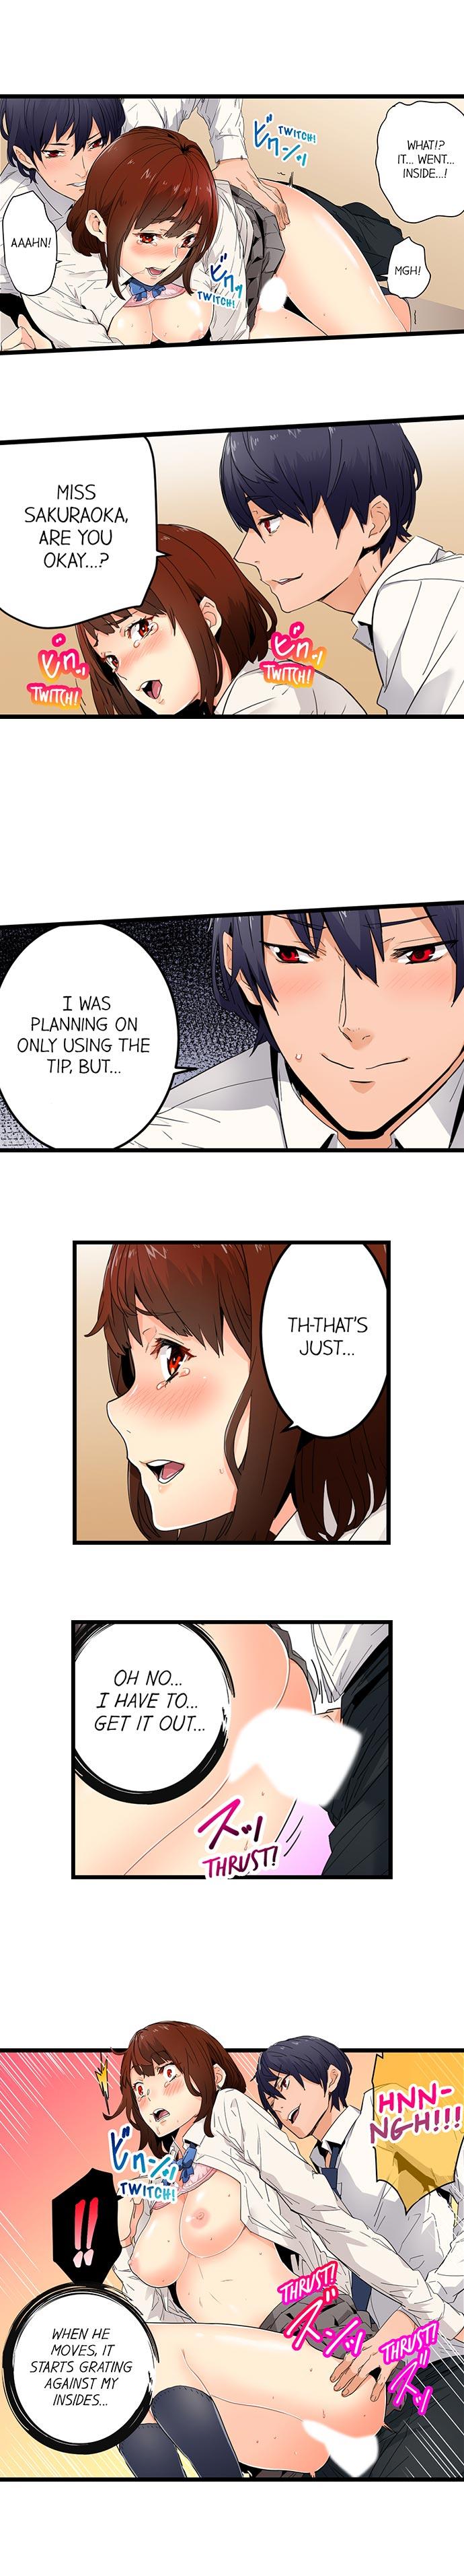 Just the Tip Inside is Not Sex Ch.6/? 26